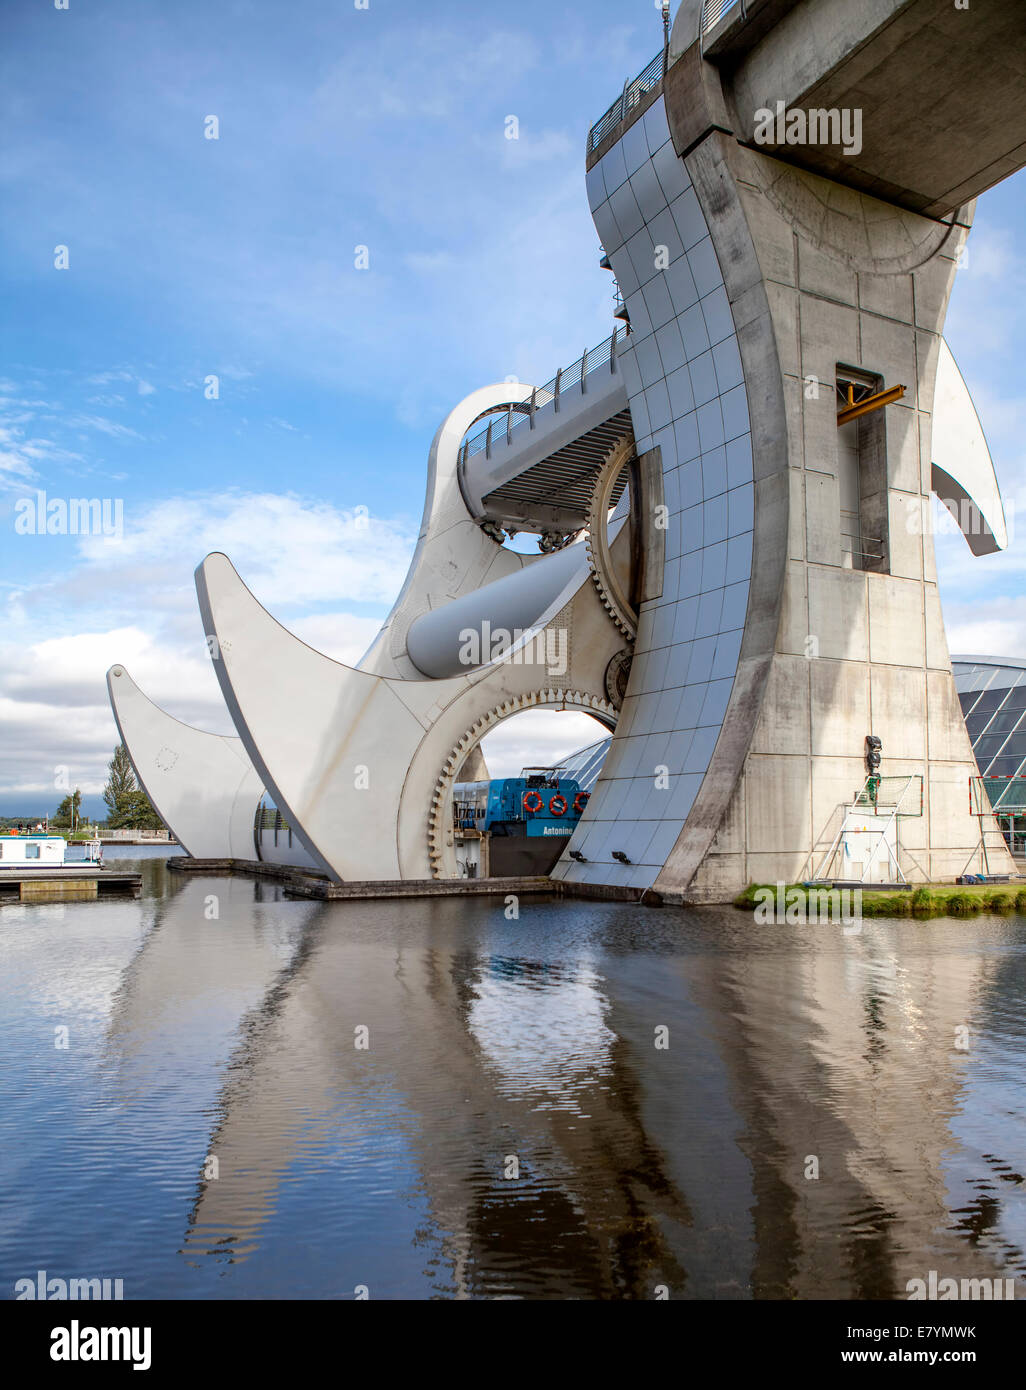 The Falkirk Wheel is a rotating boat lift in Falkirk, Scotland, connecting the Forth and Clyde Canal with the Union Canal. Stock Photo